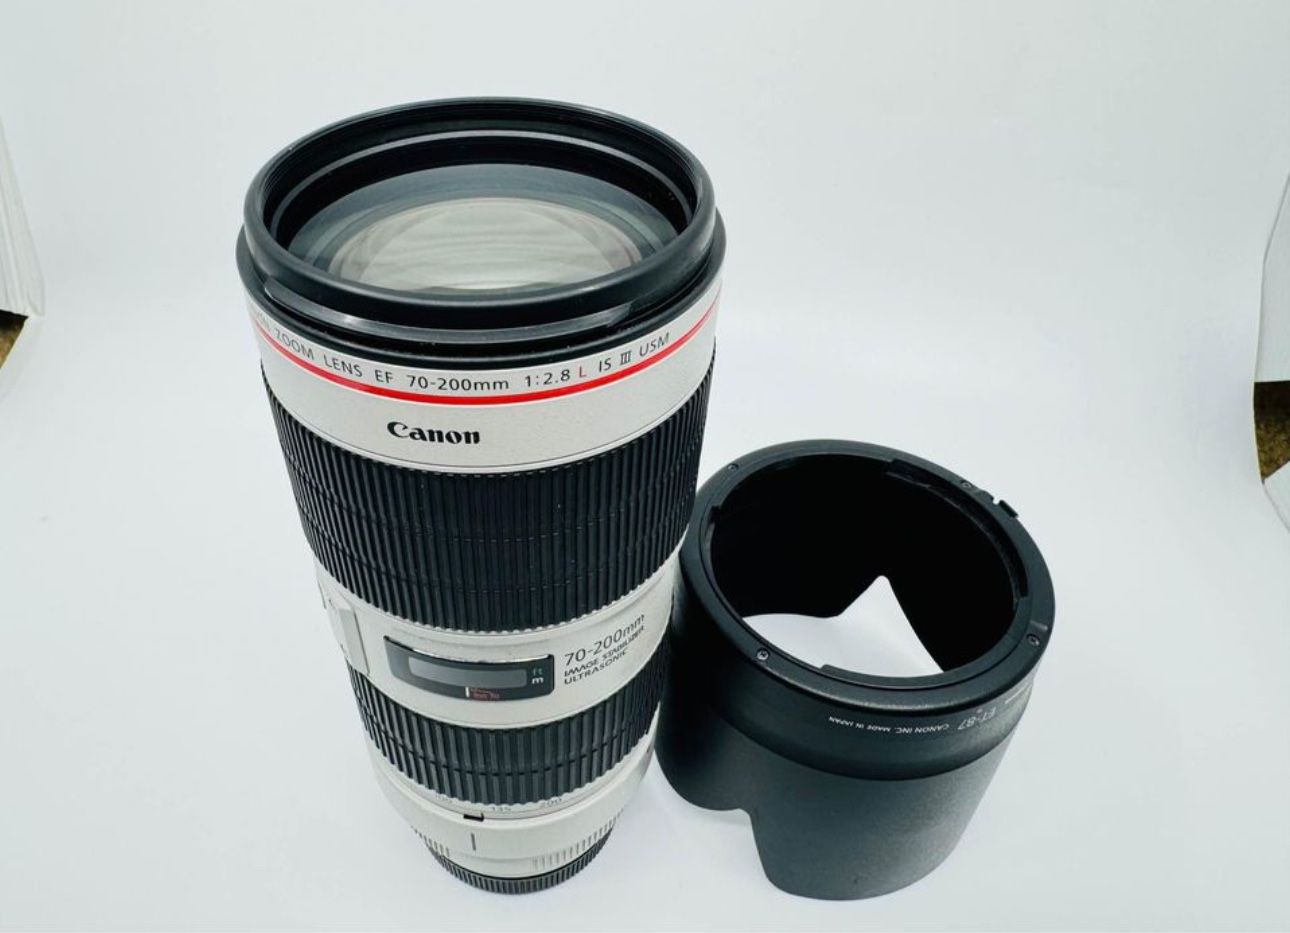 Canon EF 70-200MM F/2.8 L IS III USM LENS